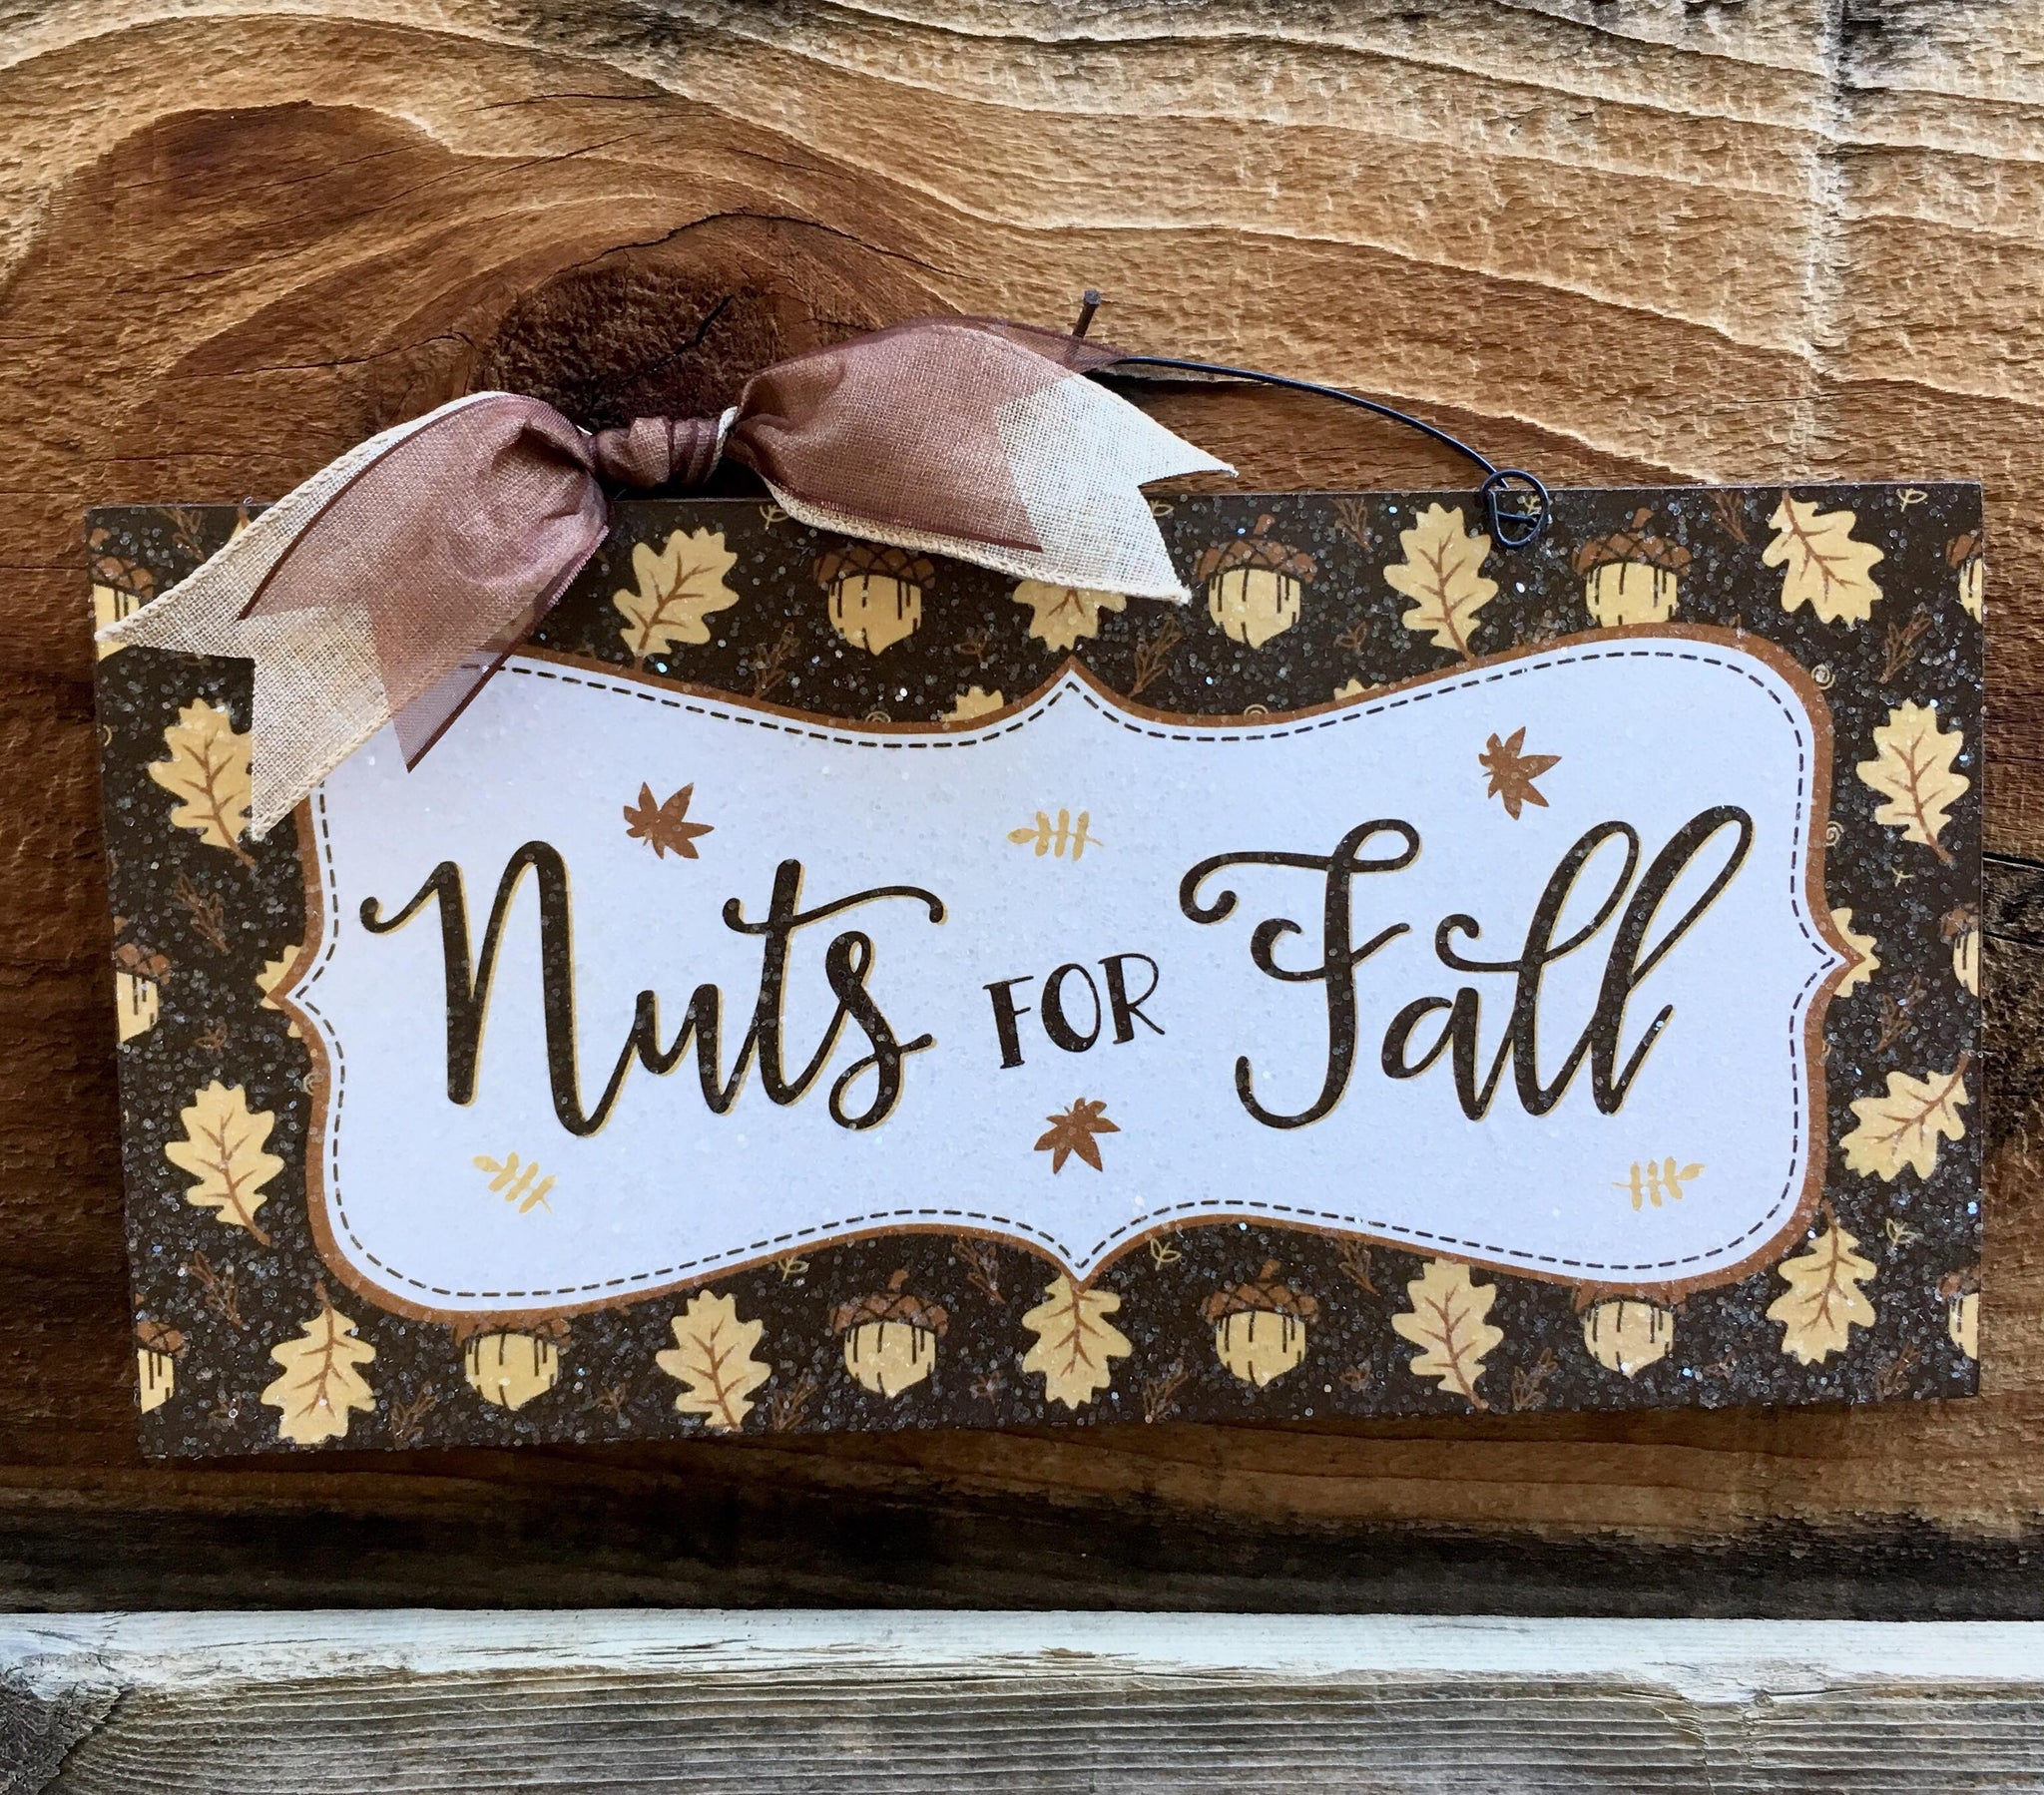 Nuts for Fall sign.